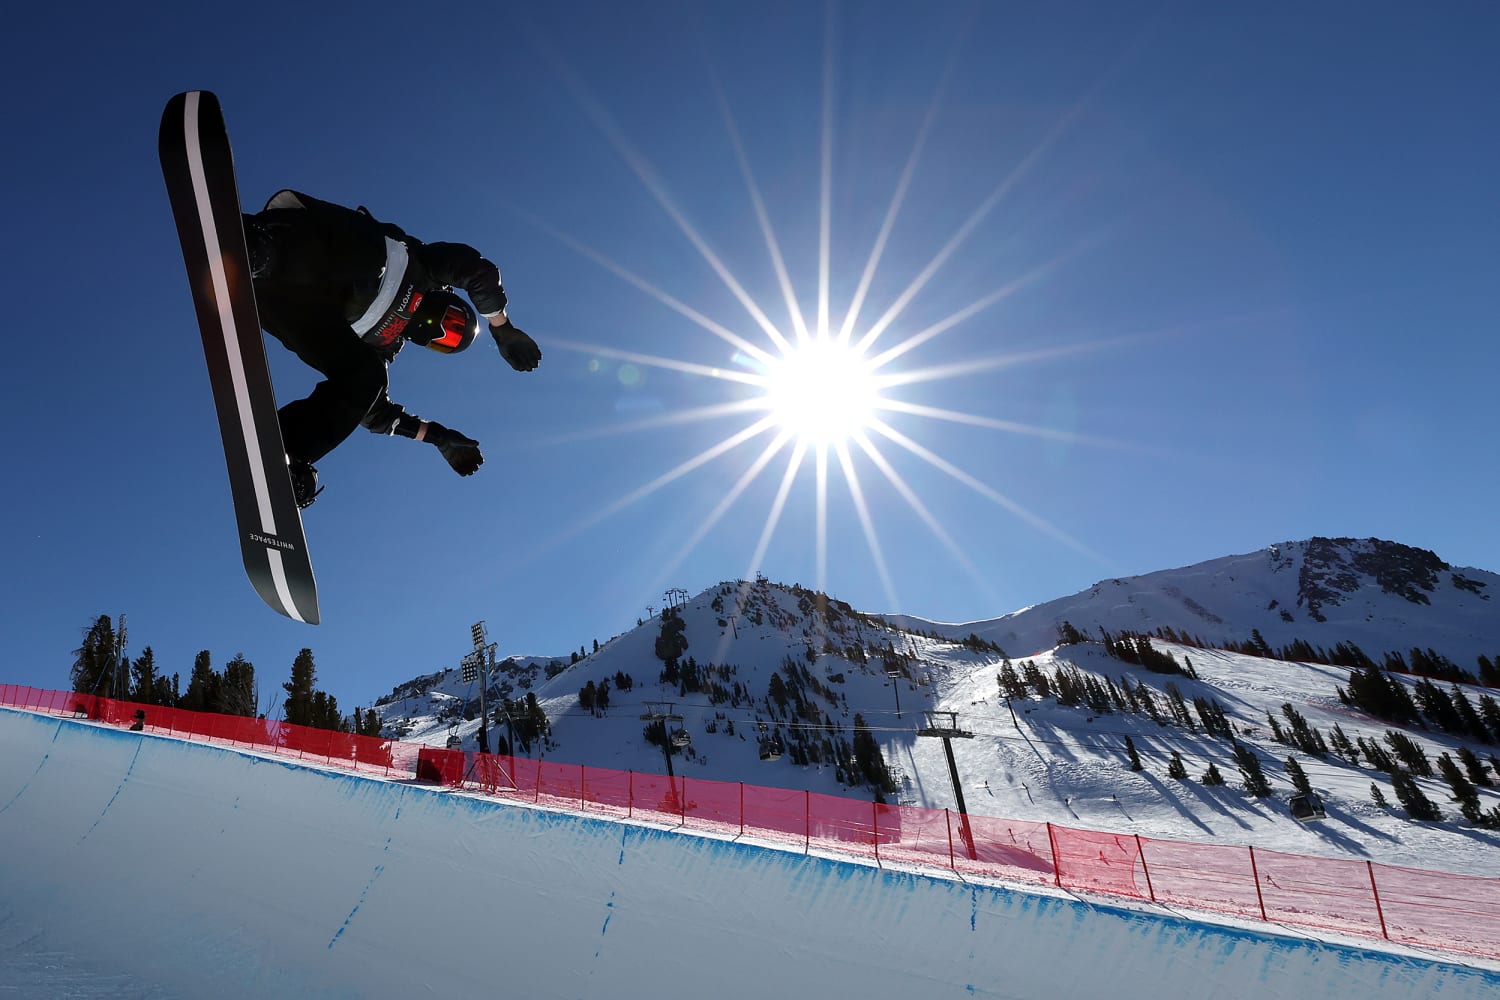 What To Know About Winter Olympic Snowboarder Shaun White – NBC Boston